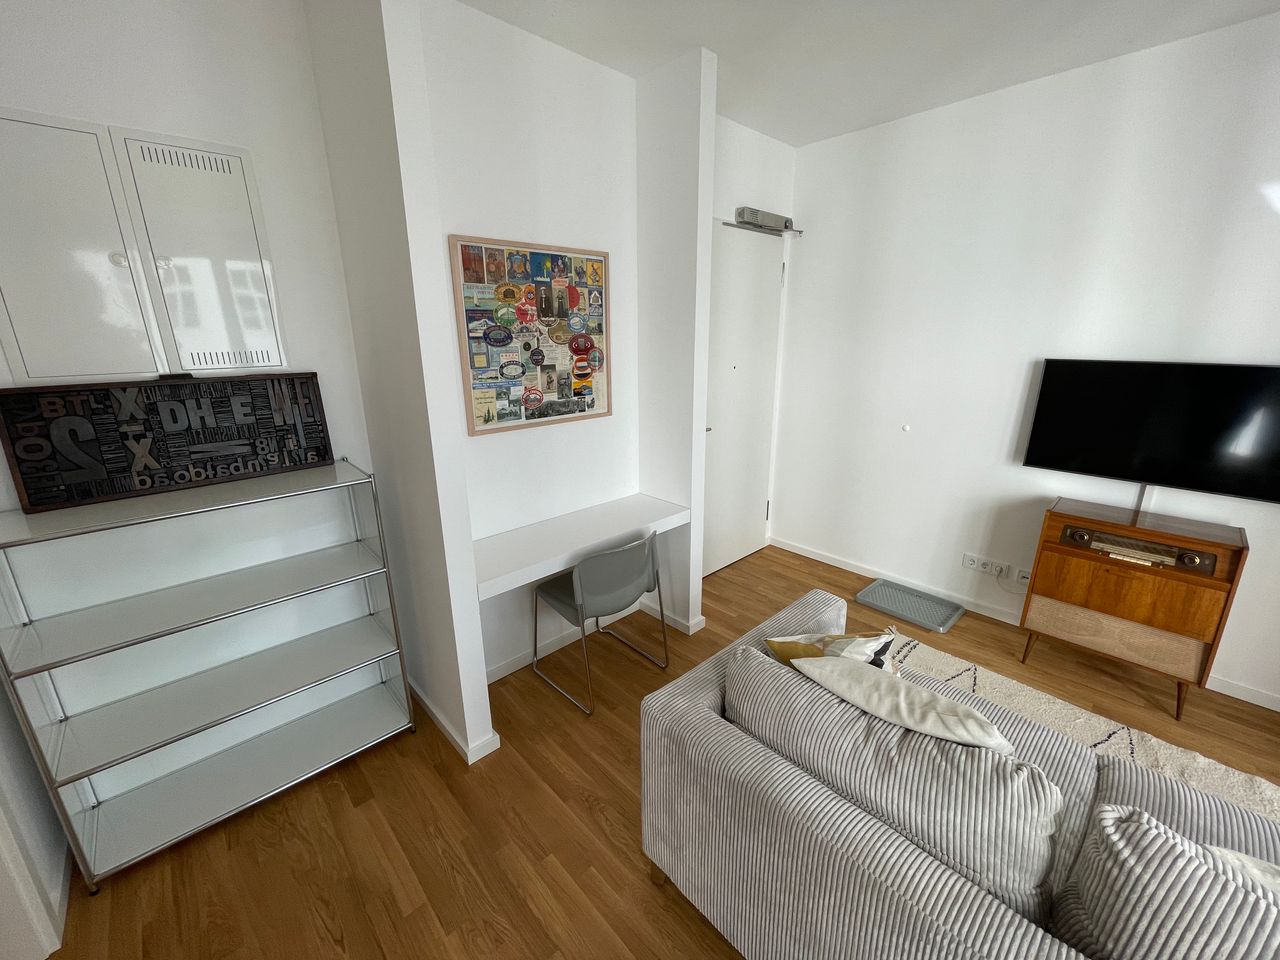 Cozy and new apartment in perfect Mitte location (Berlin)